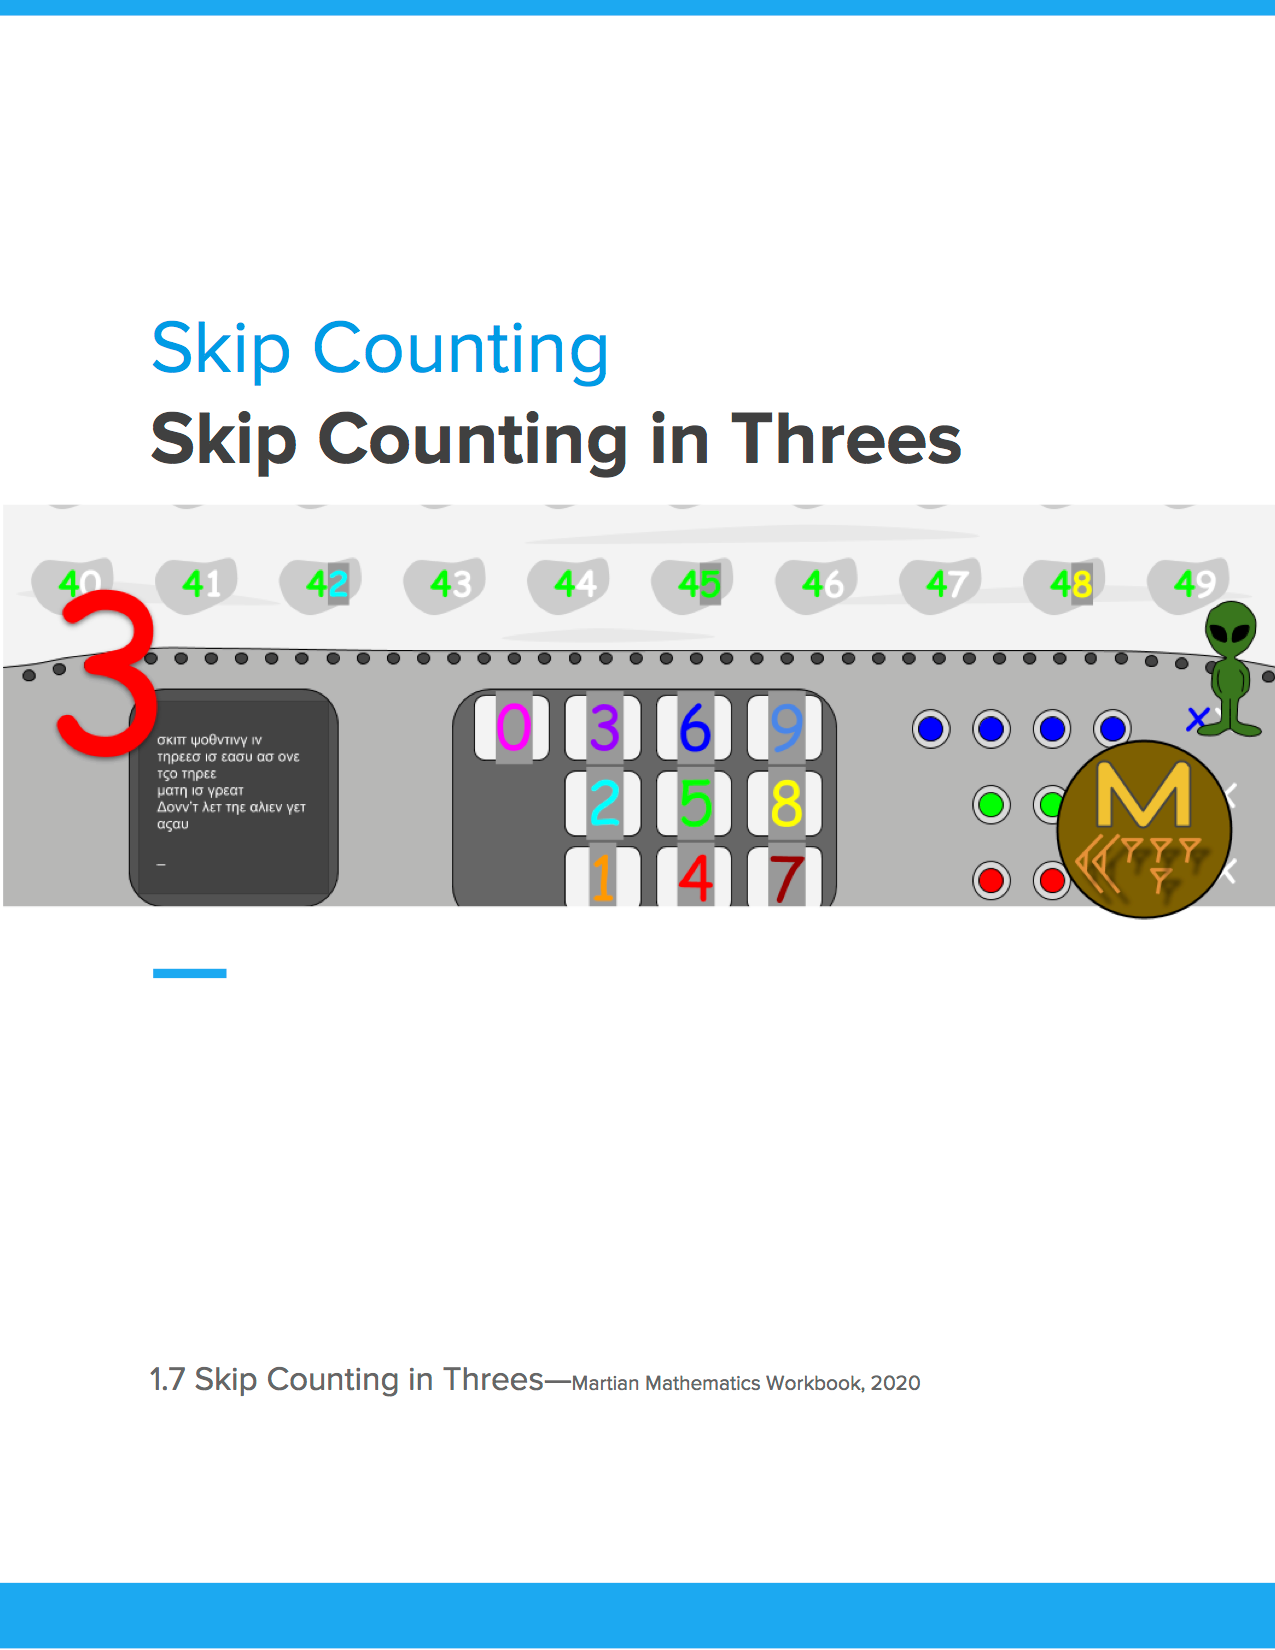 Skip Counting in Threes